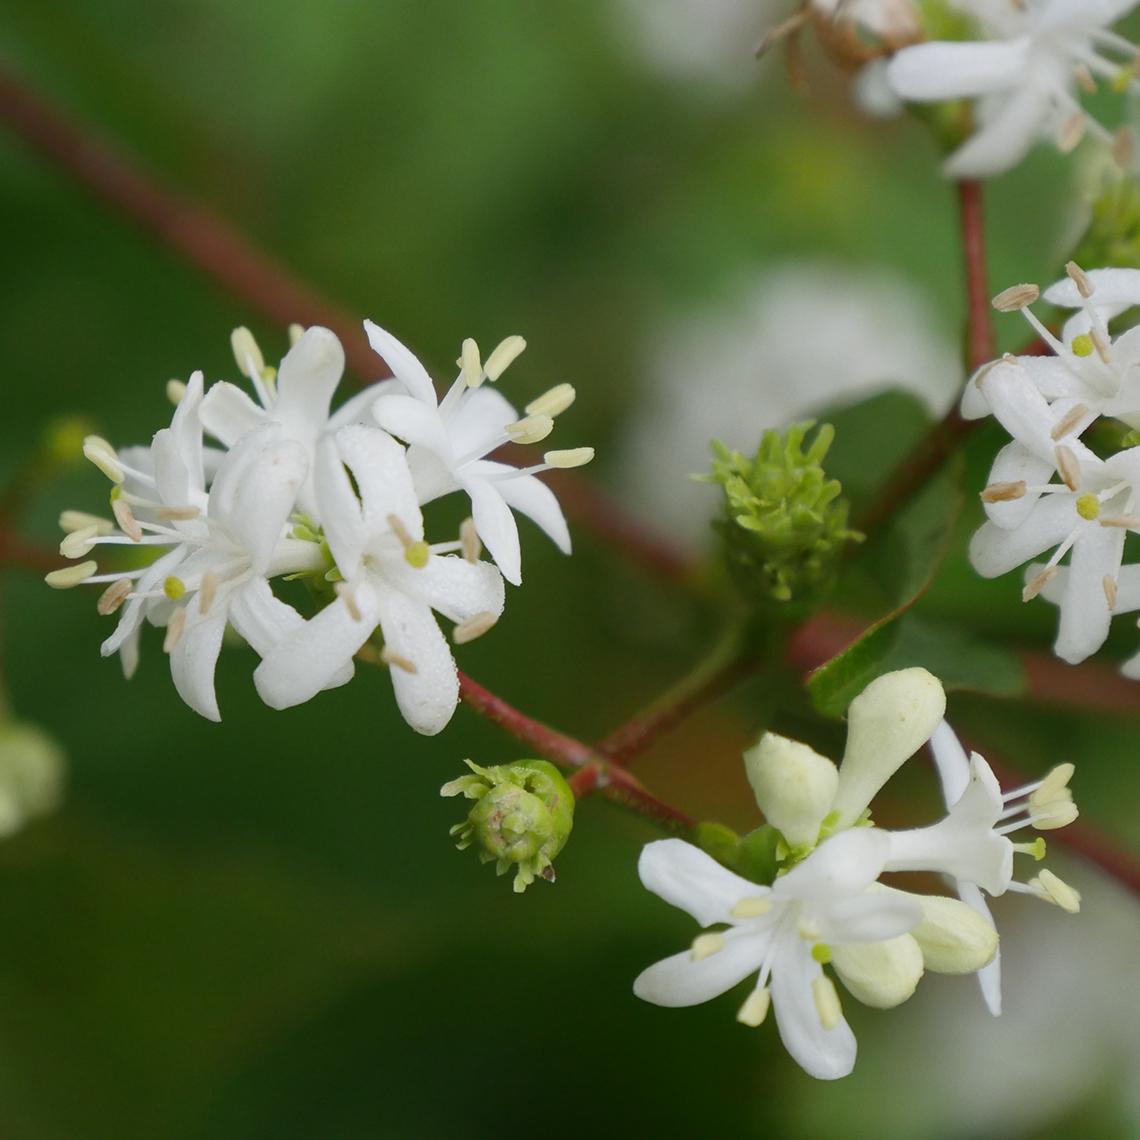 Close up of white Temple of Bloom Heptacodium blooms